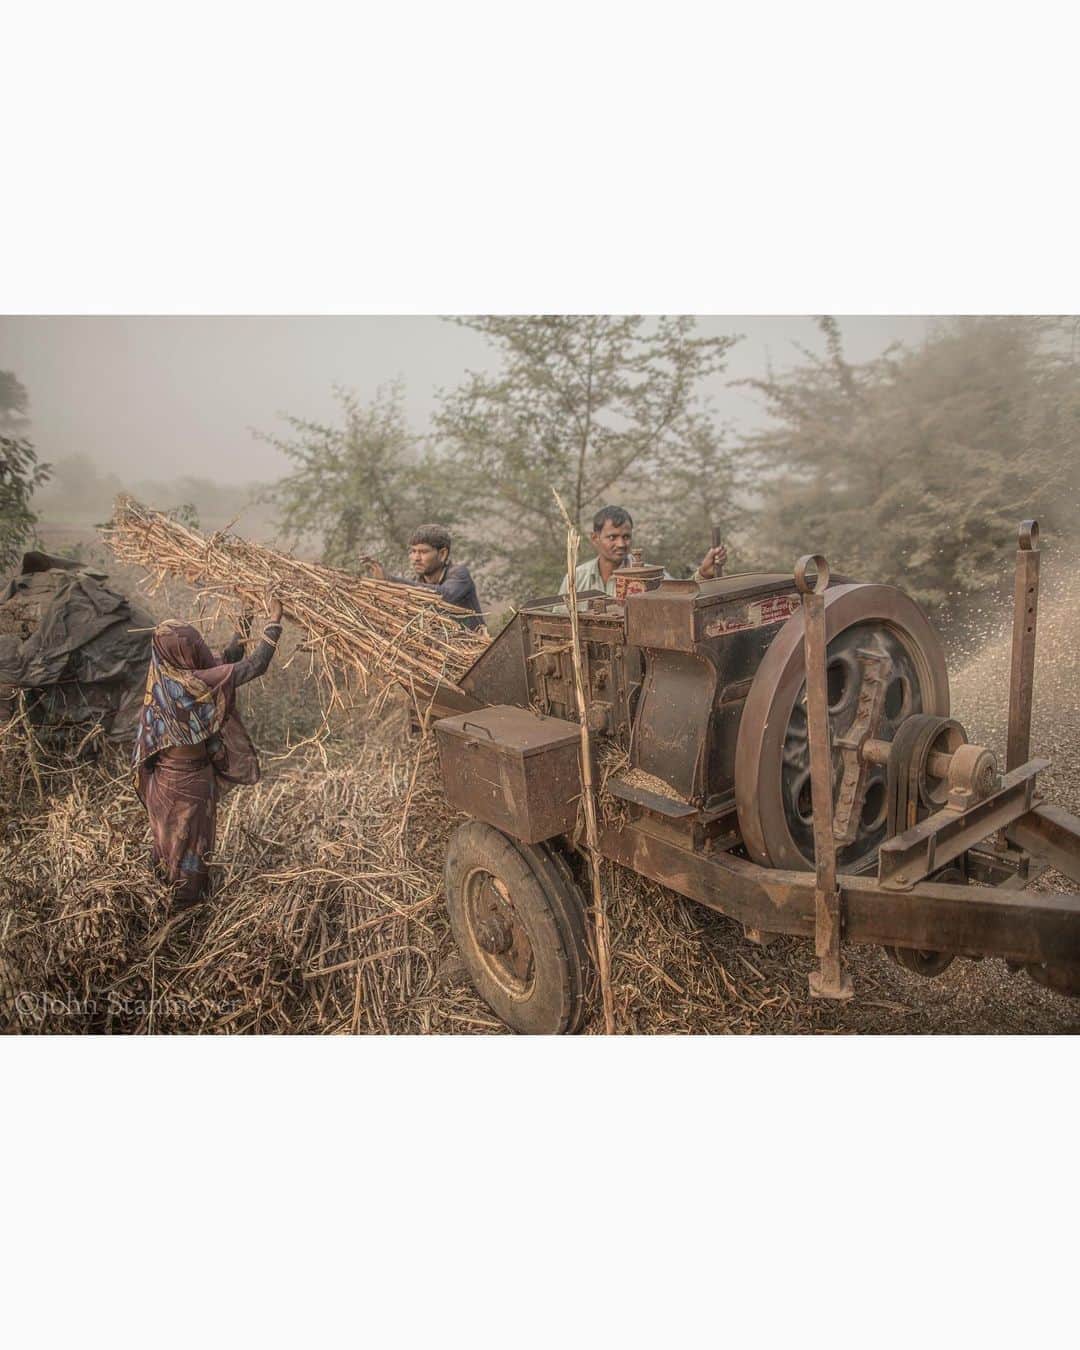 ジョン・スタンメイヤーさんのインスタグラム写真 - (ジョン・スタンメイヤーInstagram)「It was always the same, especially in the rural community, where nearly 70 percent of India’s population lives…women doing unpleasant labor. We had crossed the Chambal River, reaching the small town of Sabalgarh, when I met Rambula. She was twenty-two years old and appeared to be the primary heavy lifter of three, hoisting clusters of bakara sticks taller than Rambula, into a grinder to be turned into animal feed. The dust so thick, the veil she wore could hardly have done much good. The two men working the chewing machine did not cover their faces, every crevice of their bodies coated from the flying debris of an already hazy day. After she completed a seemingly endless supply of bakara, I spoke with Rambula. I saw how weathered her gentle hands were, the only part of her not covered in tiny bits of bakara, was her simple gold ring on her left pointing finger. Today while working around the home, I thought of Rambula. The uncountable women, and men, I have met all over the world…beautiful India does not have sole-ownership of the uncountable…who do work with no chance for change. Sharing in reminder this evening, this morning, the heaviness placed upon billions of us across our planet, especially women, boring the pointed brunt of unpleasant labor due to poverty, relentless lack of opportunity, or privilege. We could all be Rambula. ⠀⠀⠀⠀⠀⠀⠀⠀ India’s Daunting Challenge: There’s Water Everywhere, And Nowhere - Chapter 8 of the @outofedenwalk, my latest story in the August 2020 issue of @natgeo magazine. ⠀⠀⠀⠀⠀⠀⠀ @natgeo @outofedenwalk #walkingindia #edenwalk #india #sabalgarh #madhyapradesh⁩ #bakara #animalfeed #woman #womenlabor #hardlabor #portrait #ring」8月8日 11時44分 - johnstanmeyer